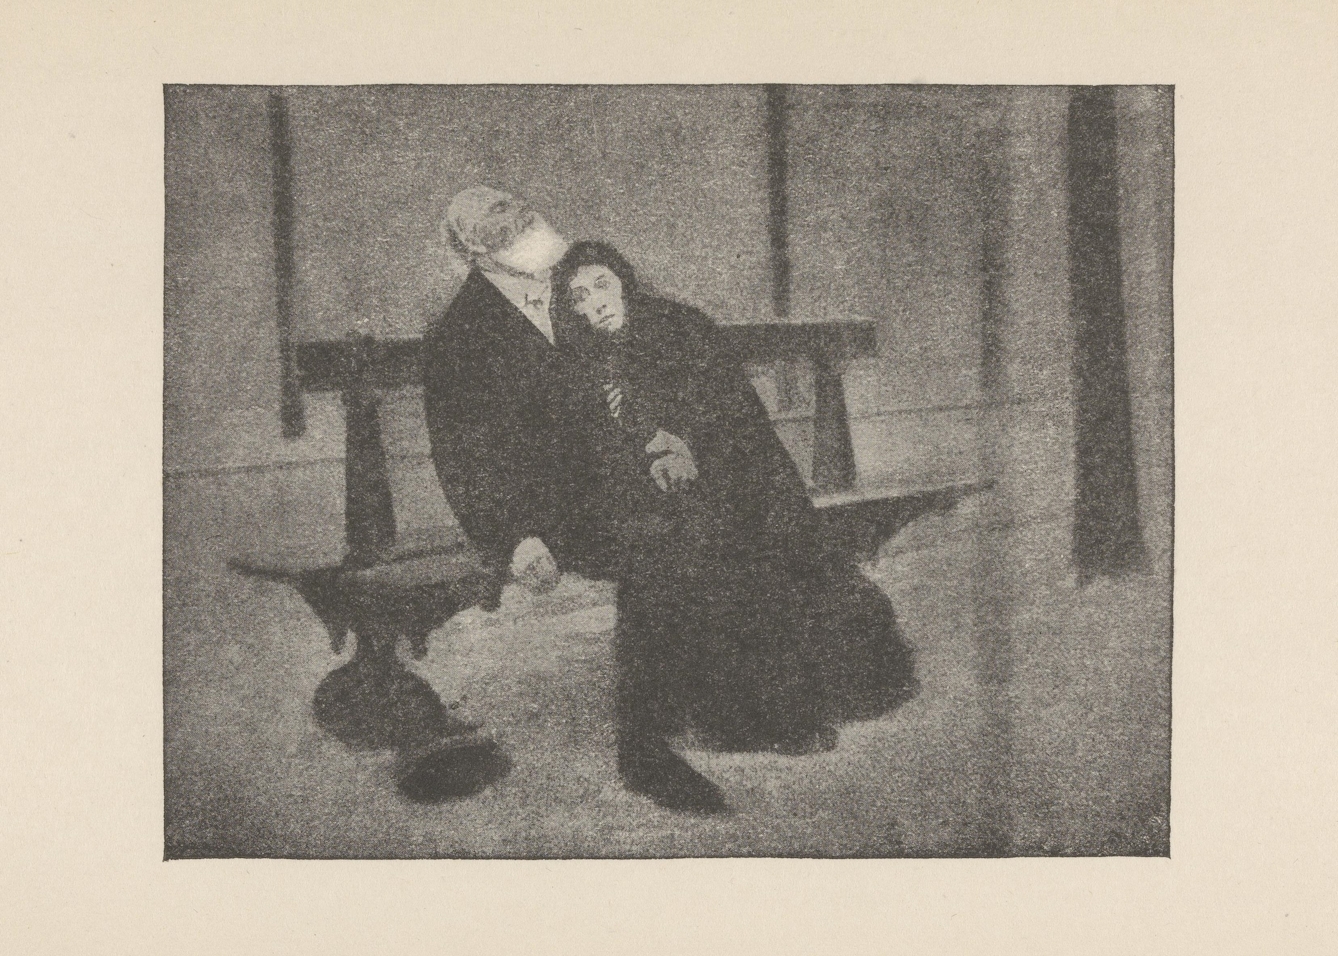 Black and white image of a man and woman sitting on a bench. The woman is leaning into the man.